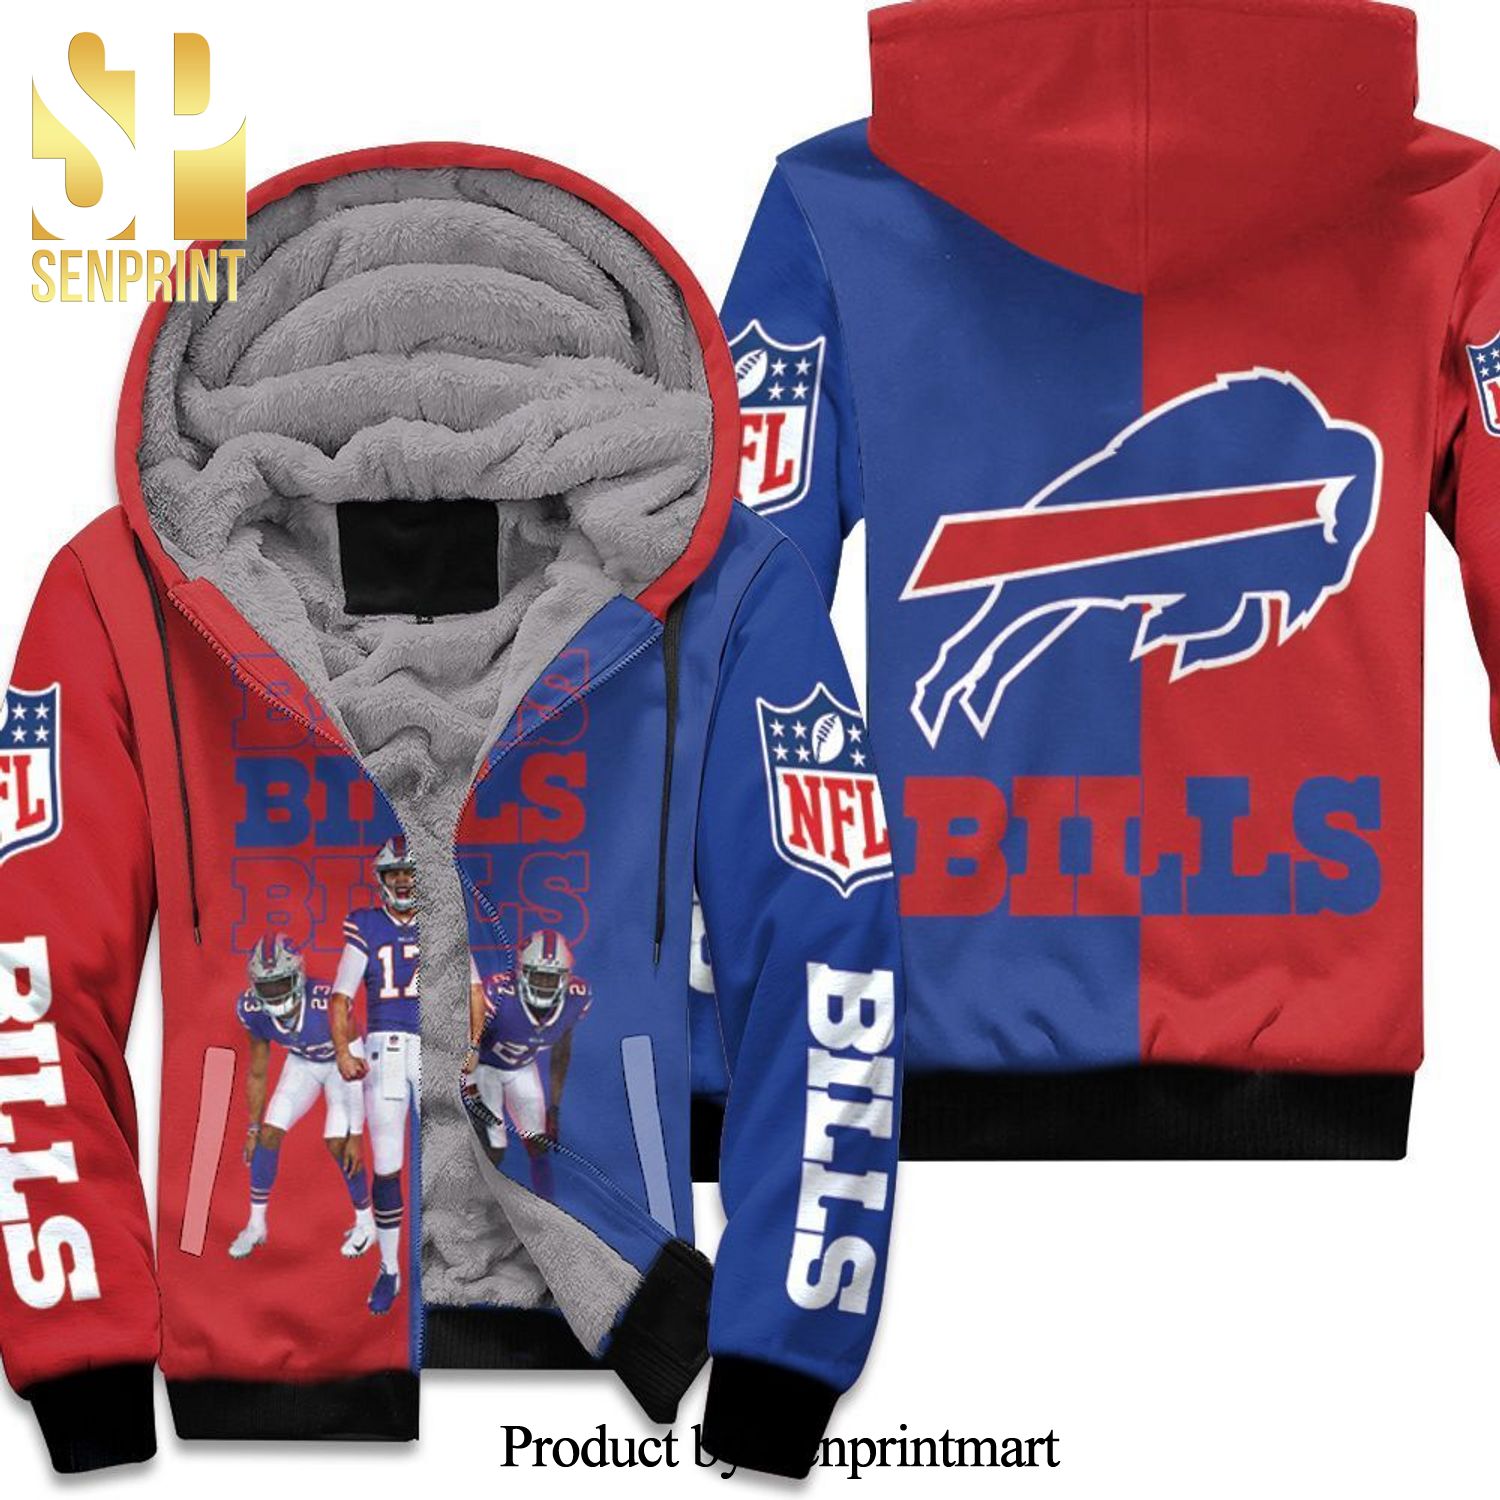 Buffalo Bills Afc East Division Champions 2020 New Style Full Print Unisex Fleece Hoodie